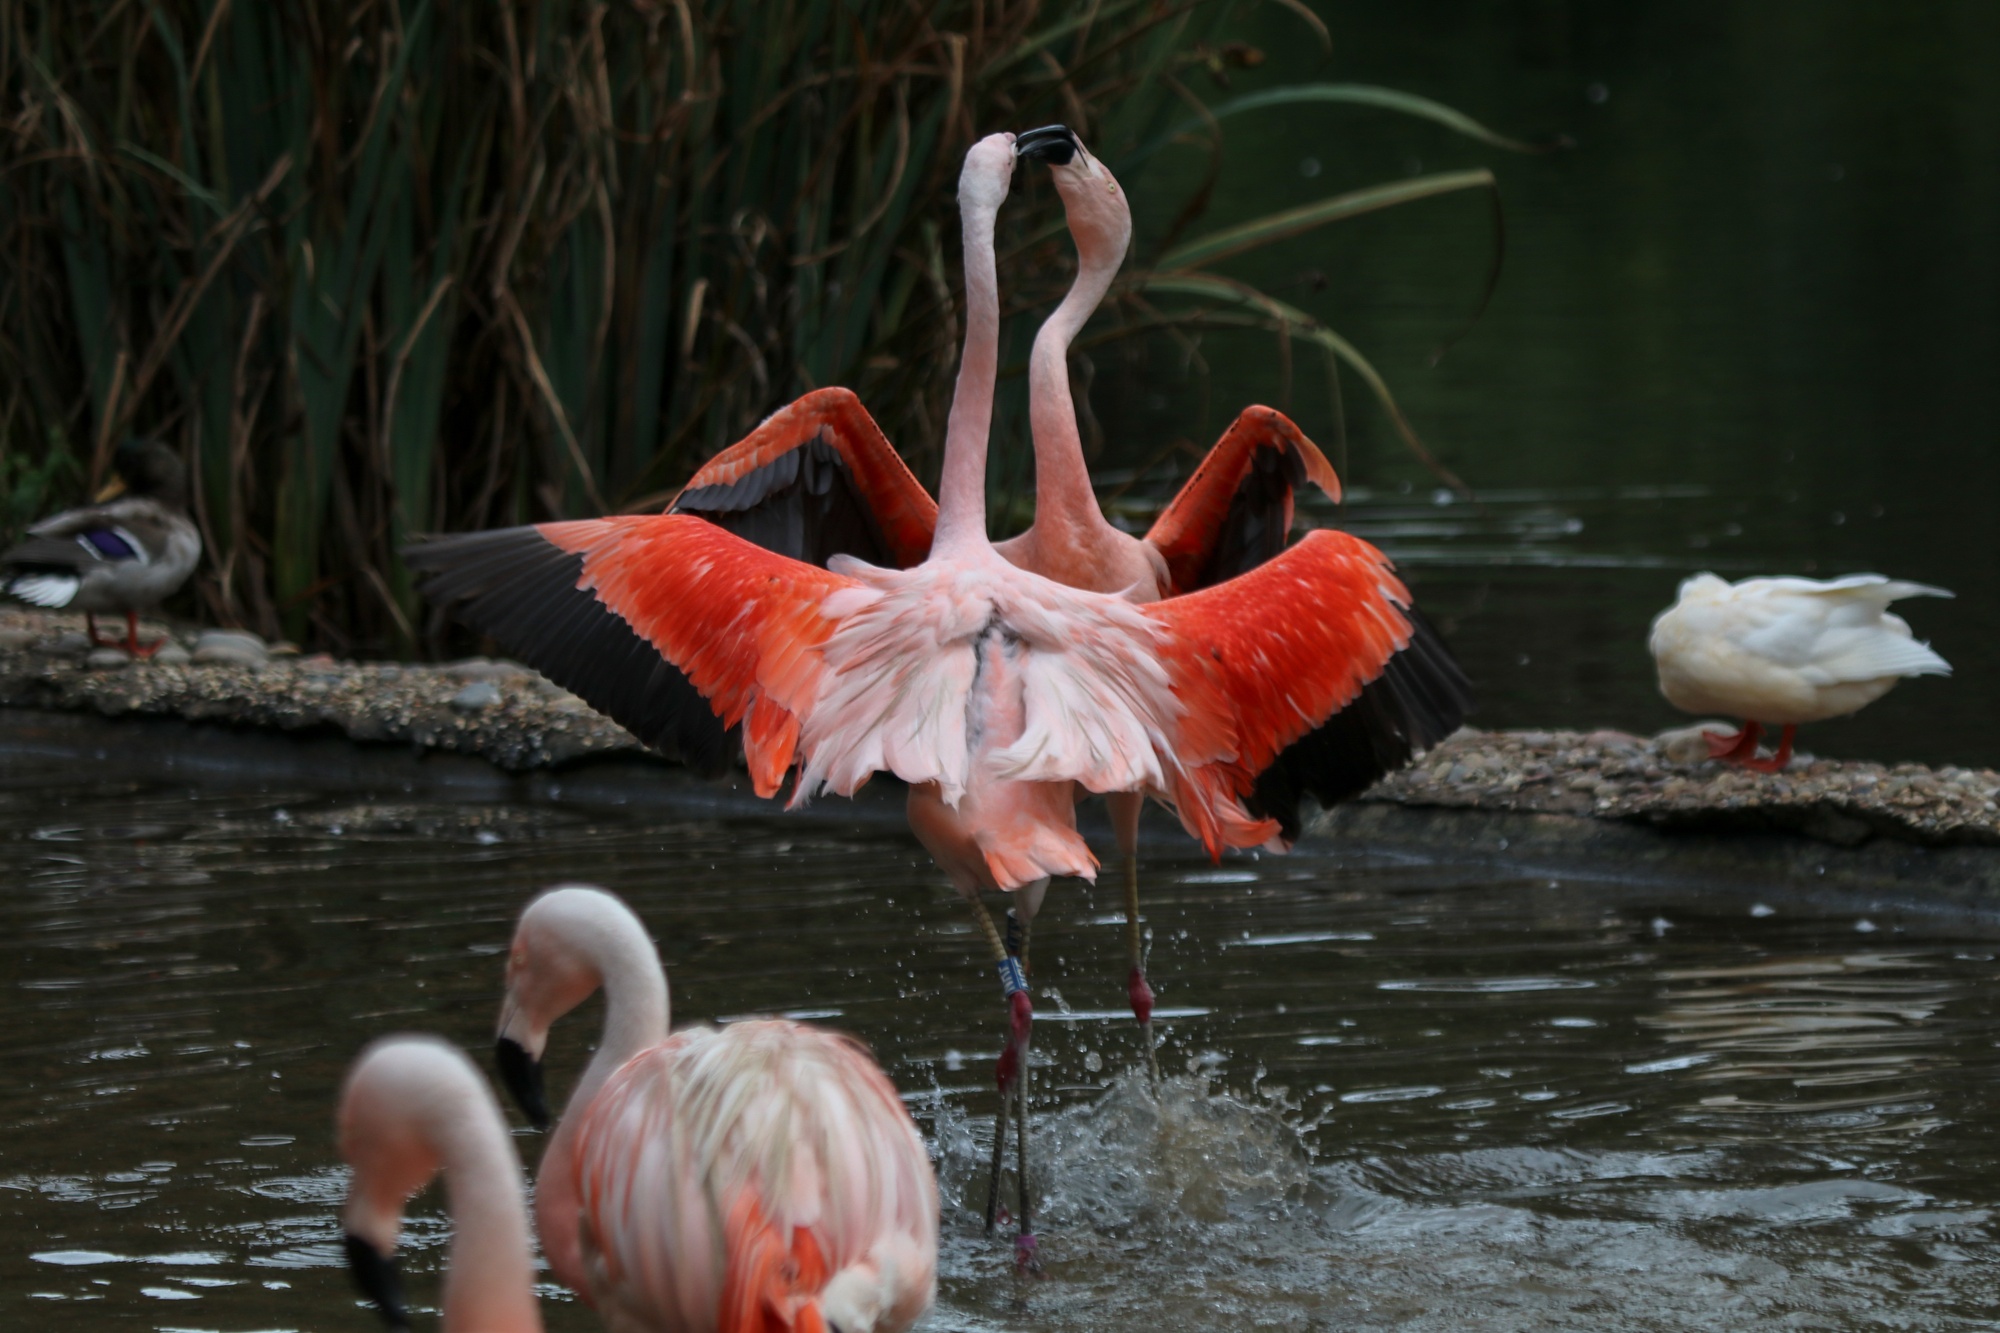 A pair of Chilean flamingos standing in water with faciing eachother with wings spread in what appears to be a mating dance. Several other flamingos in foreground